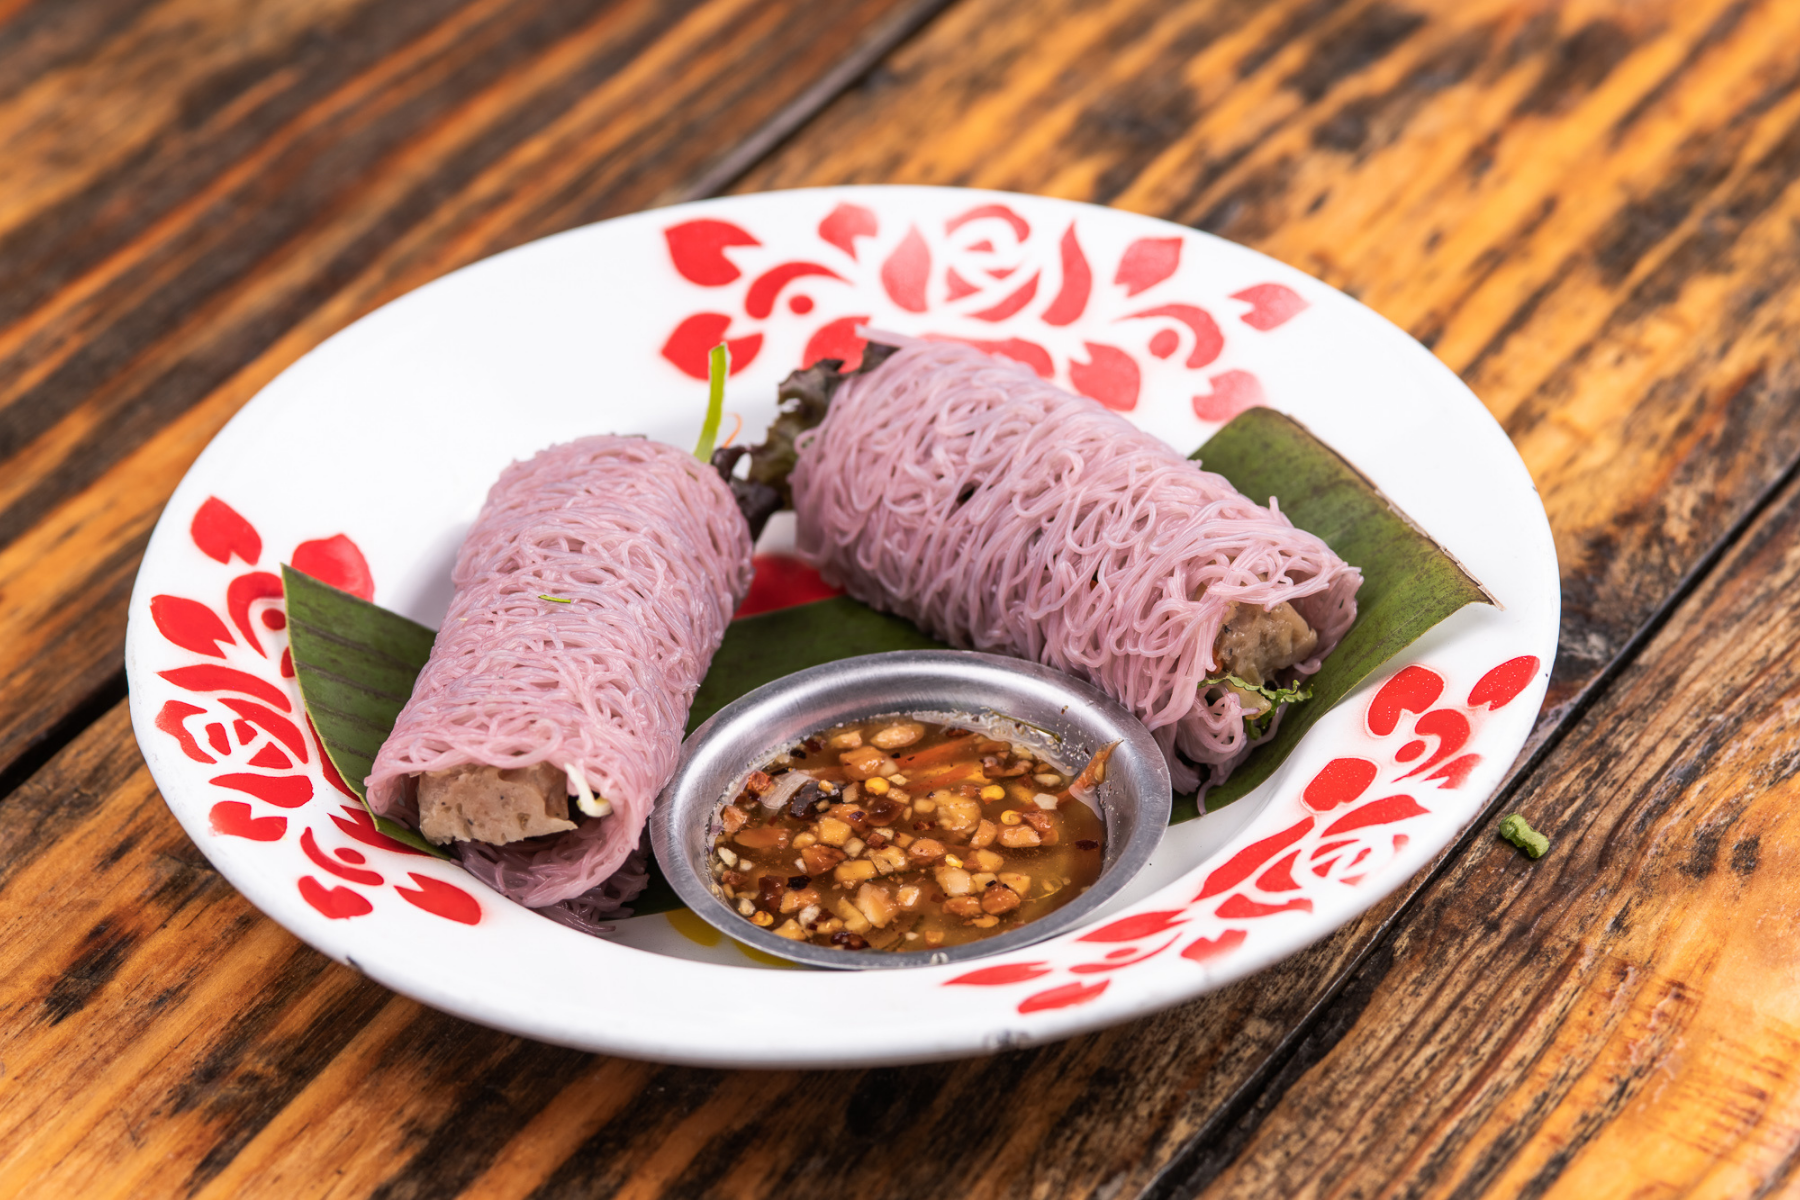 Purple-tinted rice noodles wrapped around a filling.